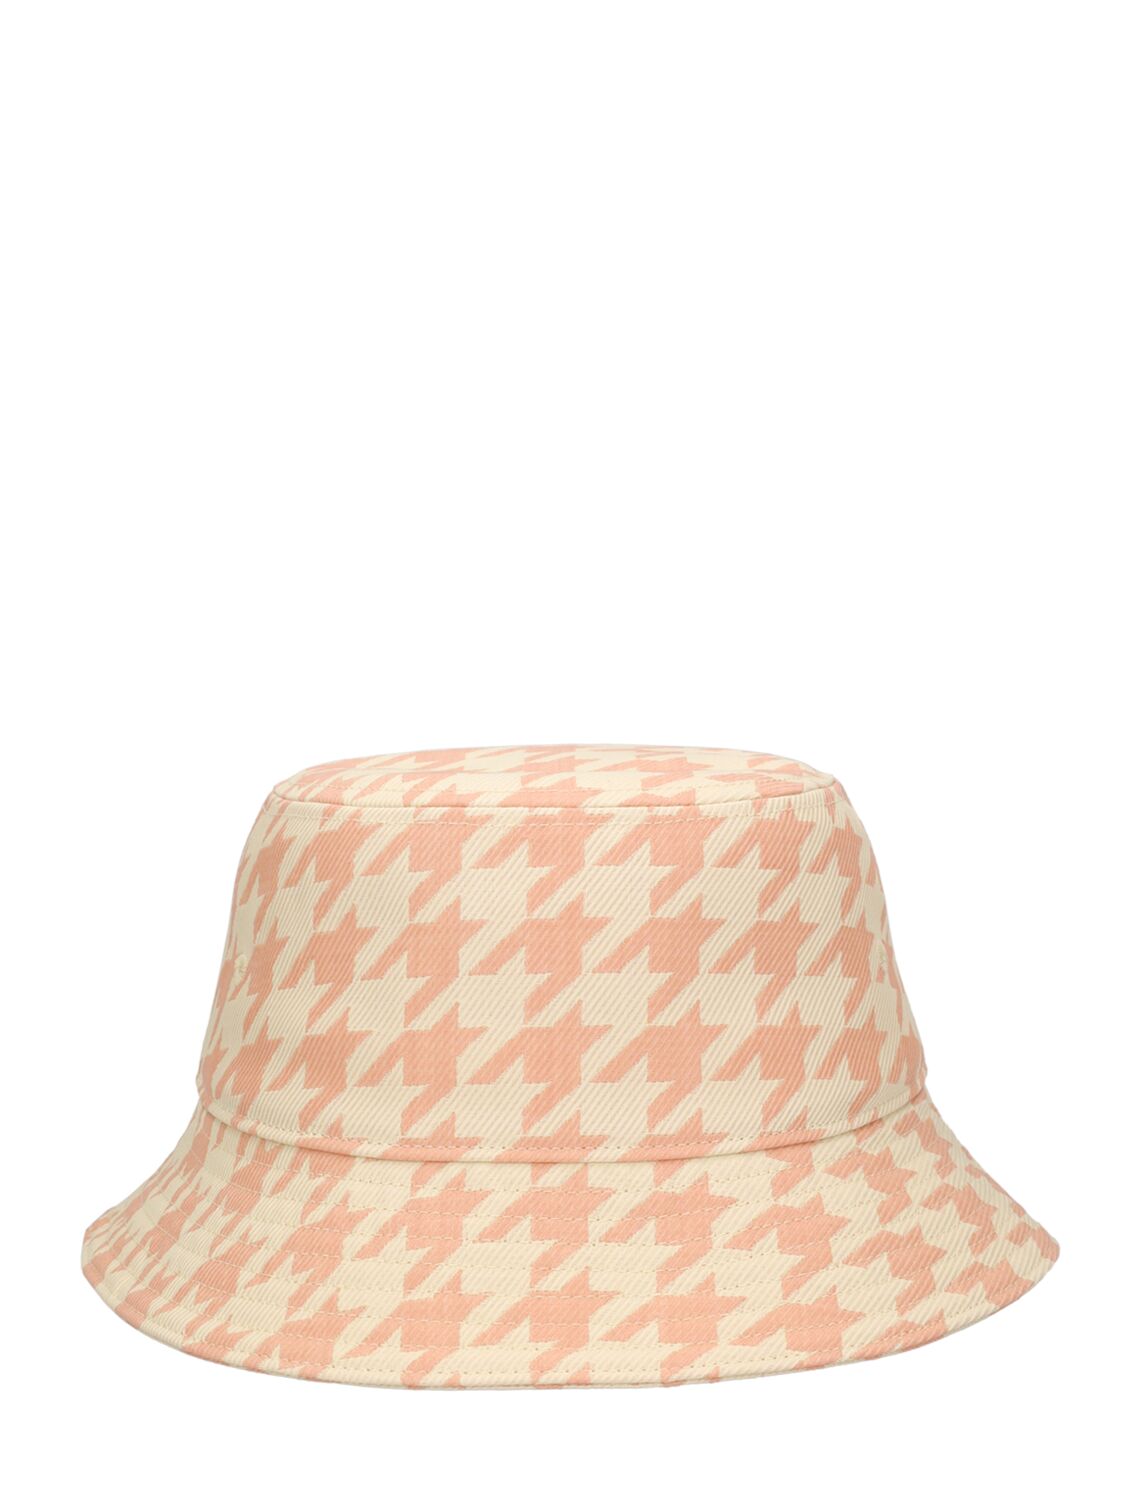 Burberry Houndstooth Distressed Bucket Hat In Neutral